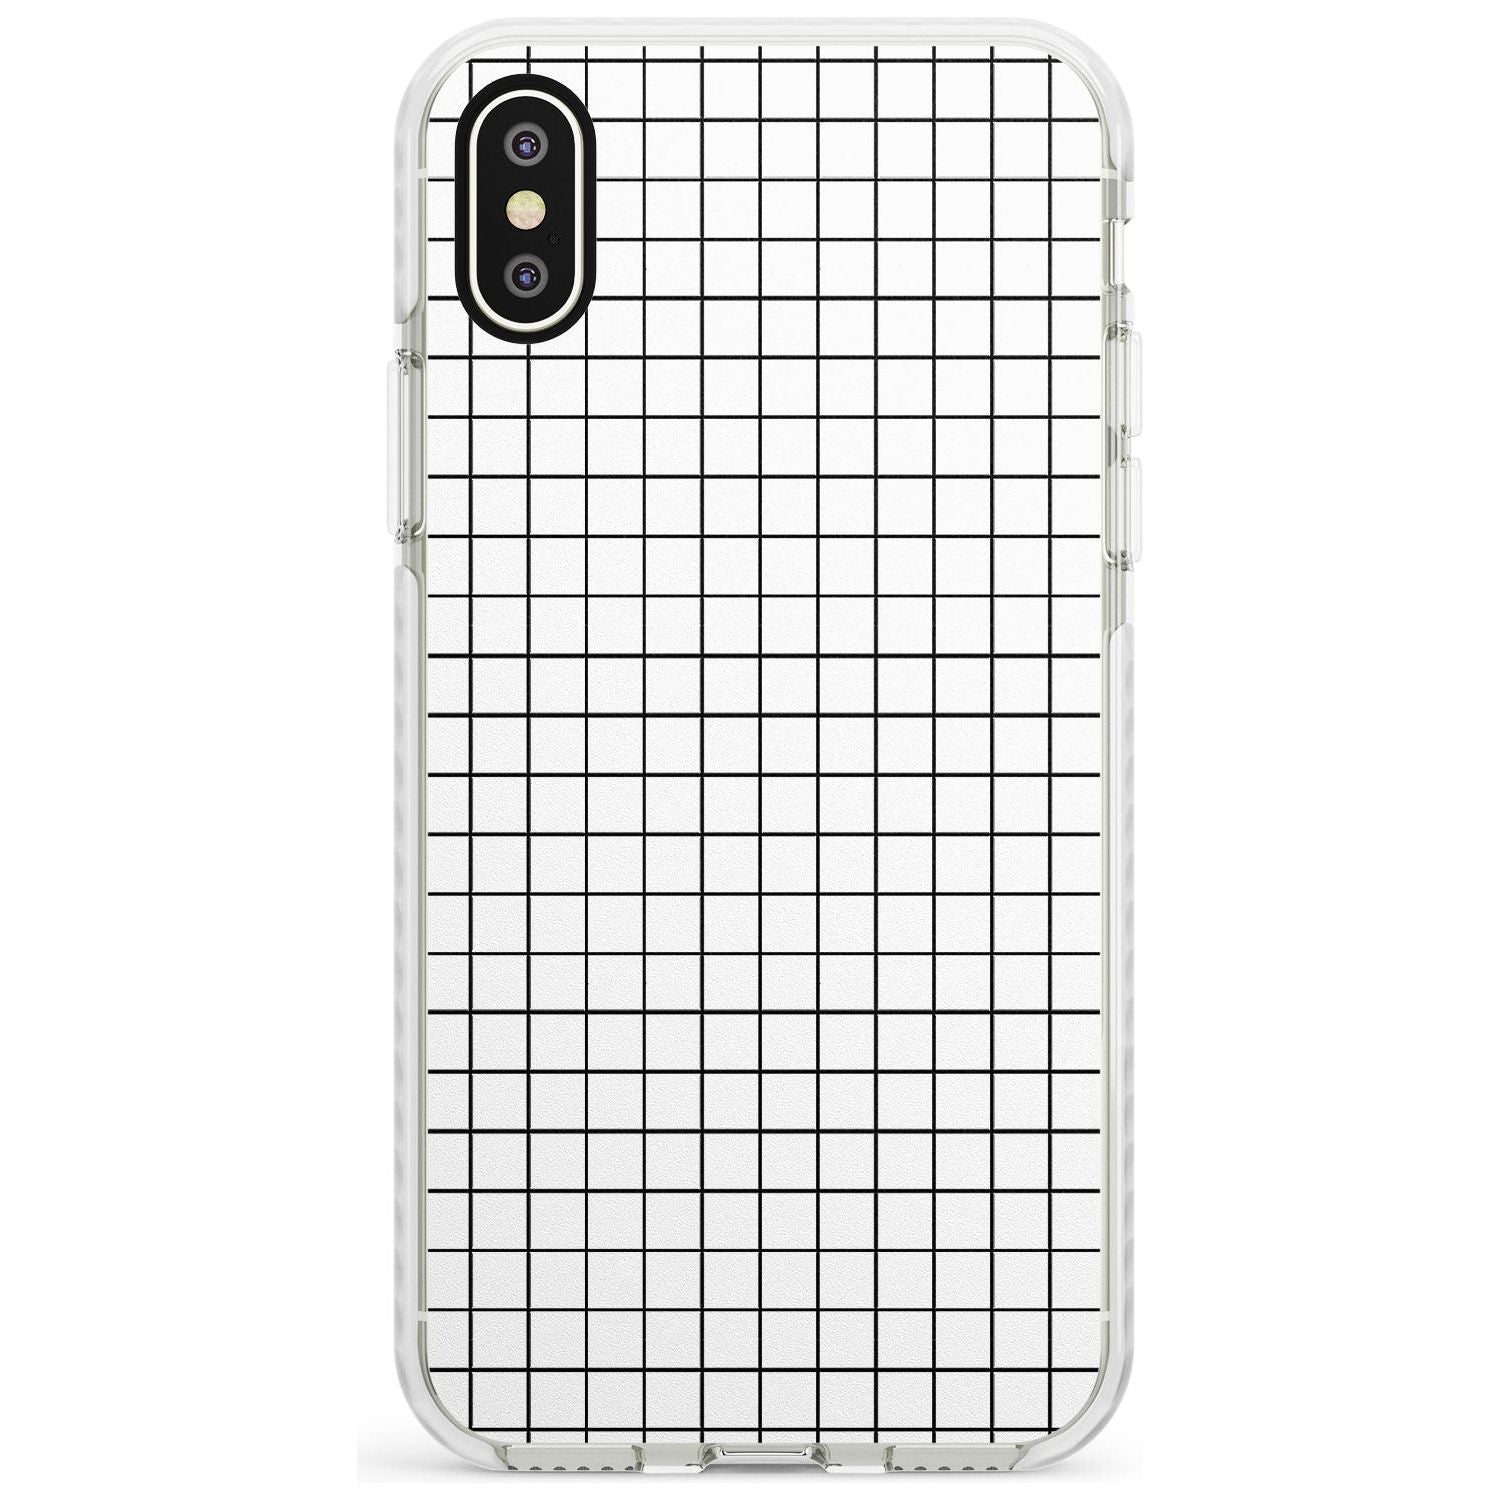 Simplistic Small Grid Designs White Impact Phone Case for iPhone X XS Max XR